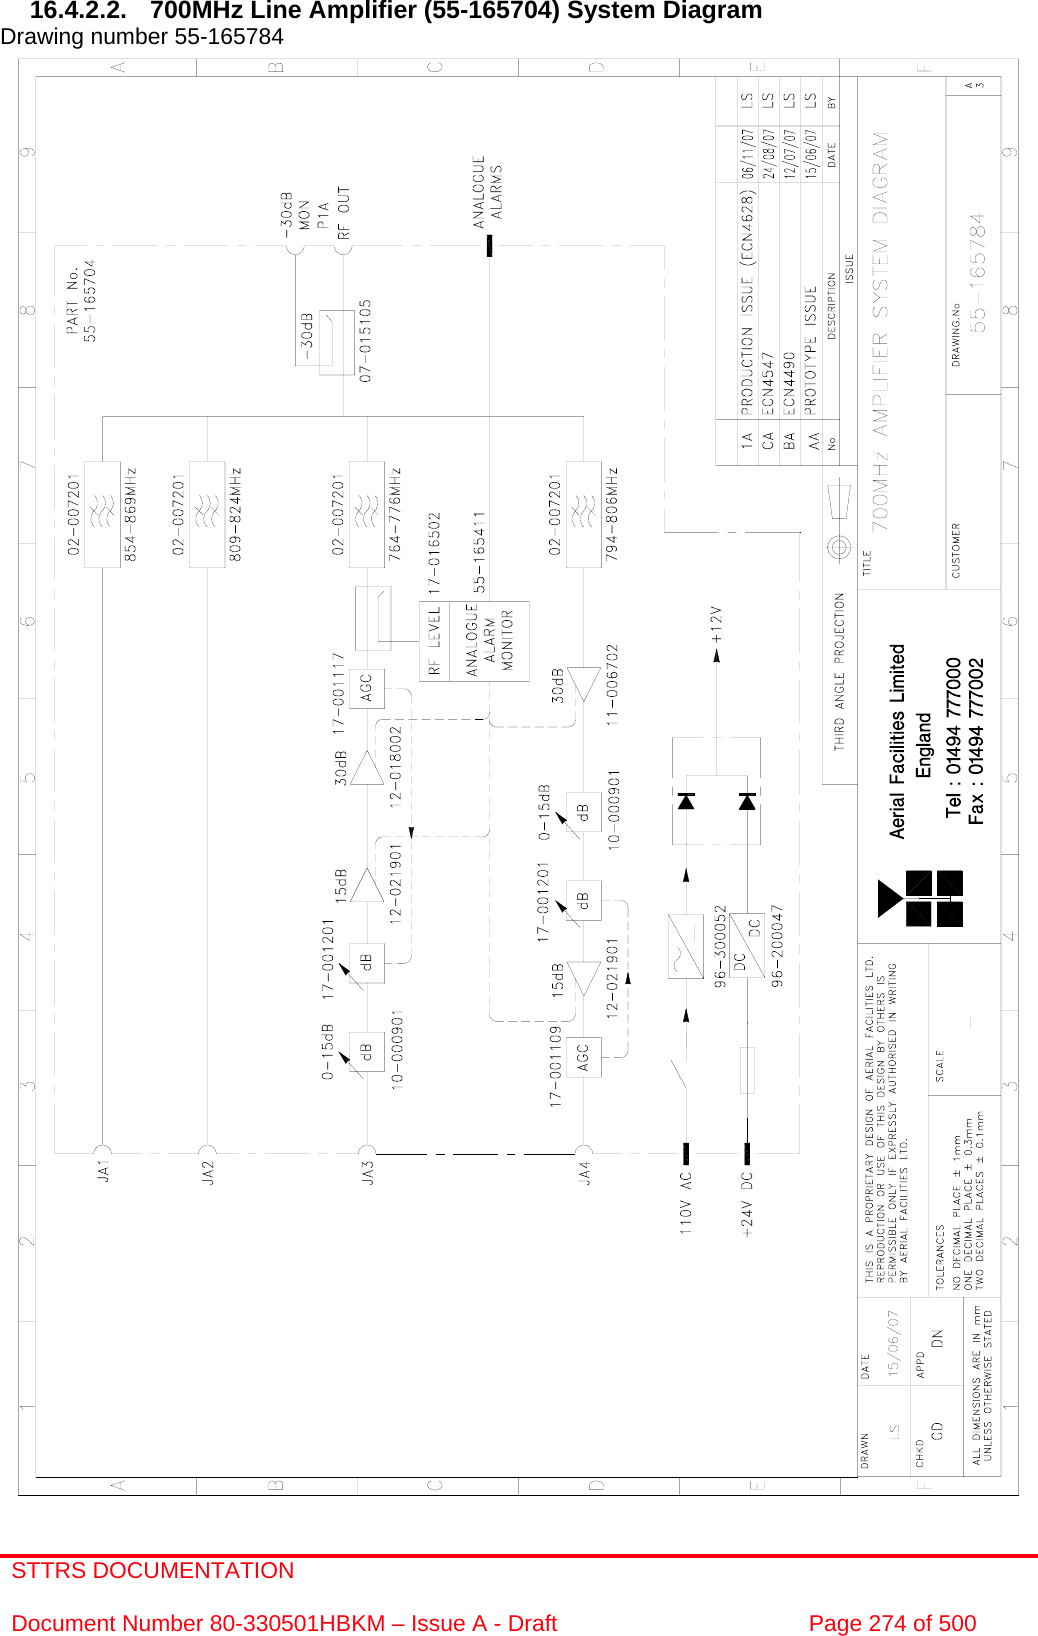 STTRS DOCUMENTATION  Document Number 80-330501HBKM – Issue A - Draft  Page 274 of 500   16.4.2.2.  700MHz Line Amplifier (55-165704) System Diagram  Drawing number 55-165784                                                       